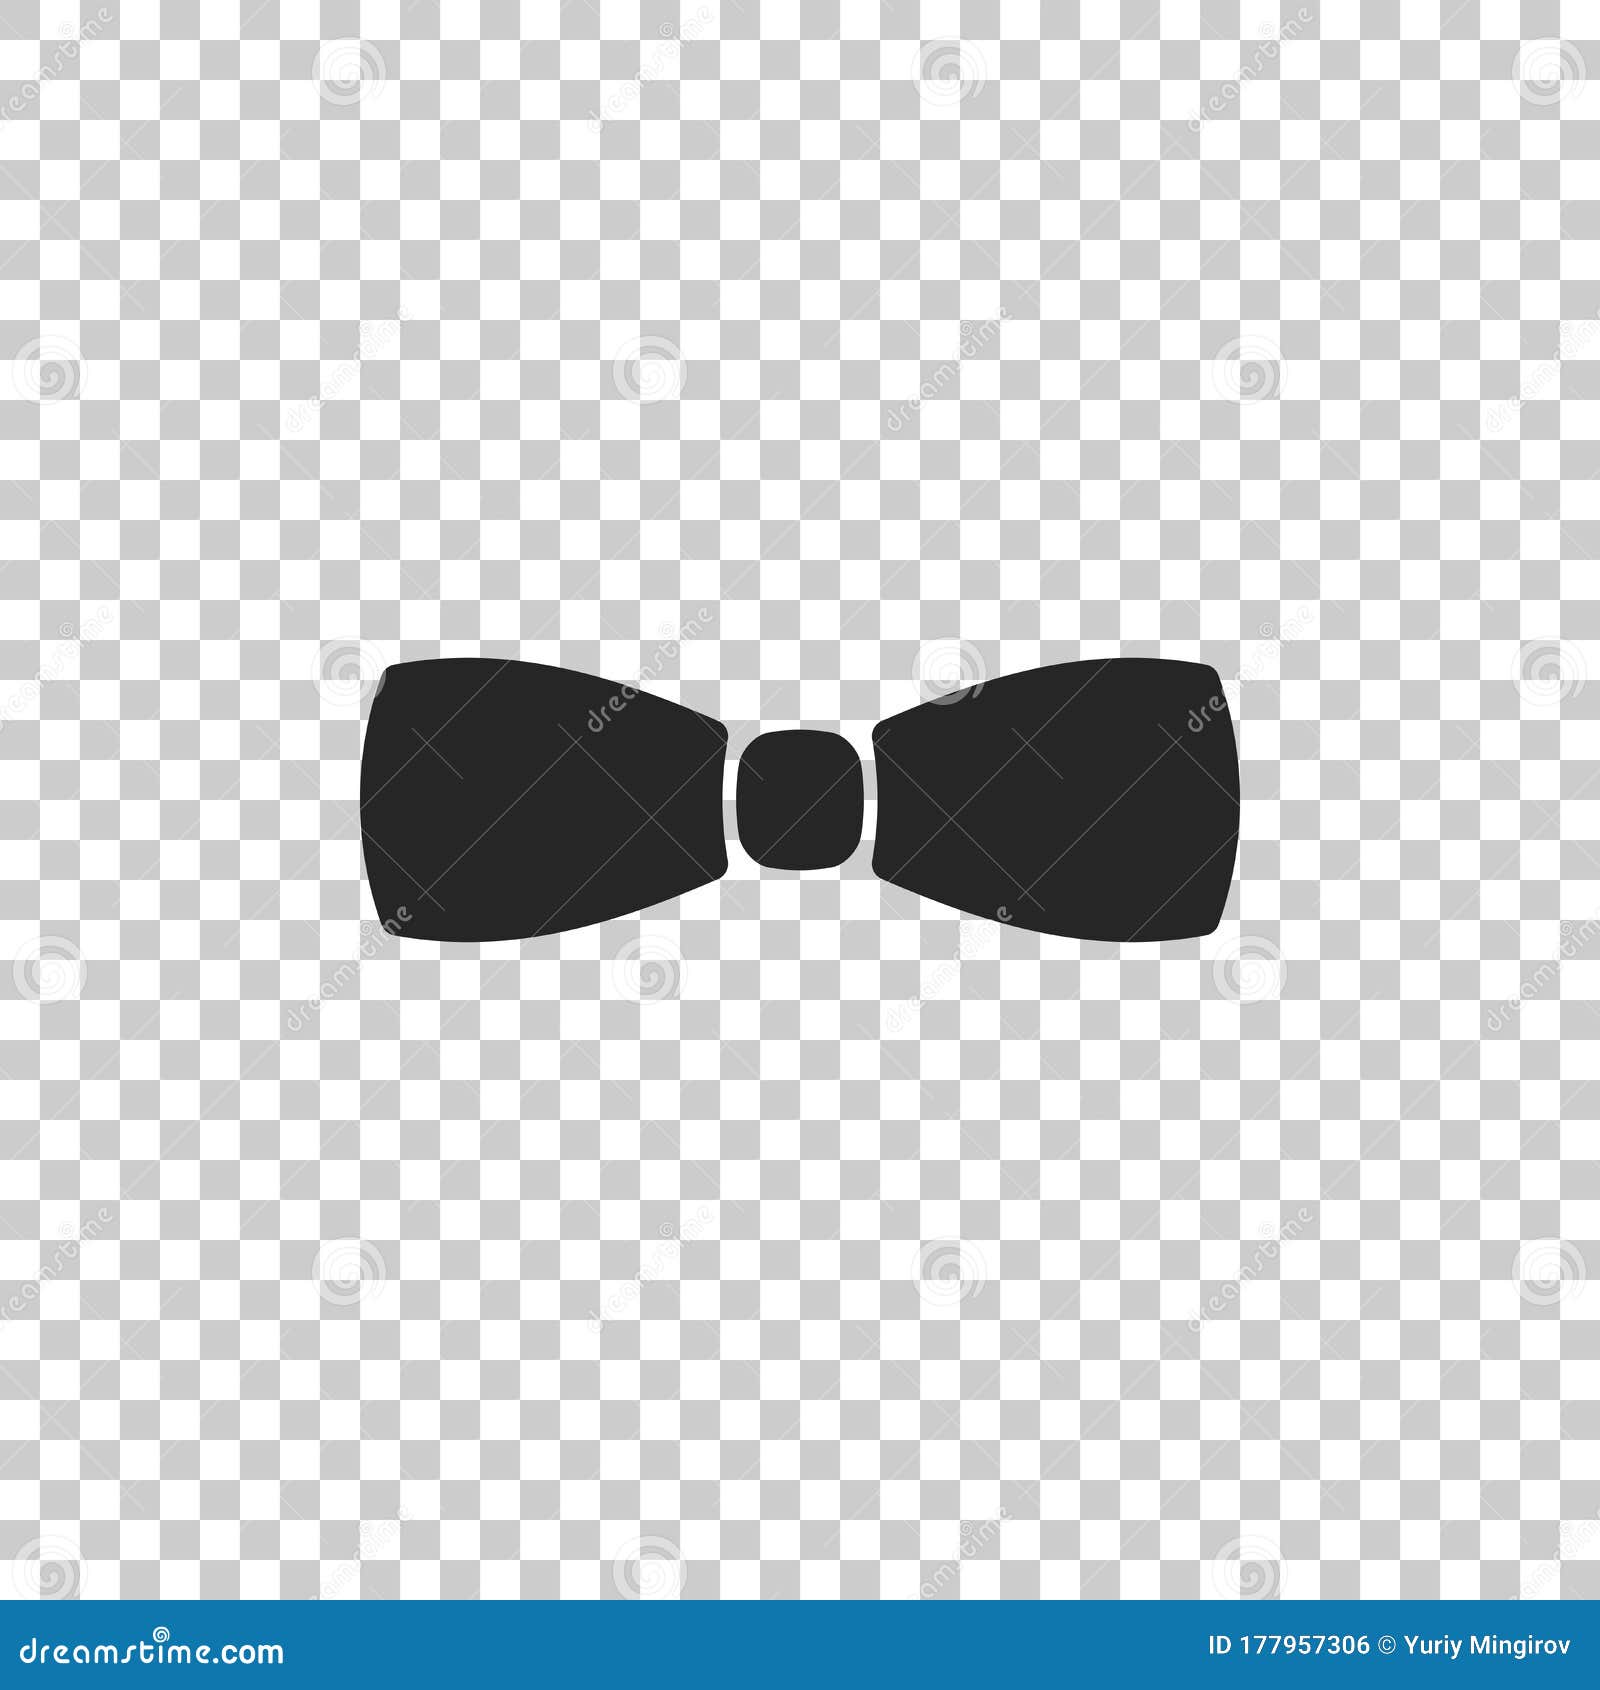 Bow Tie Icon Isolated on Transparent Background Stock Vector ...